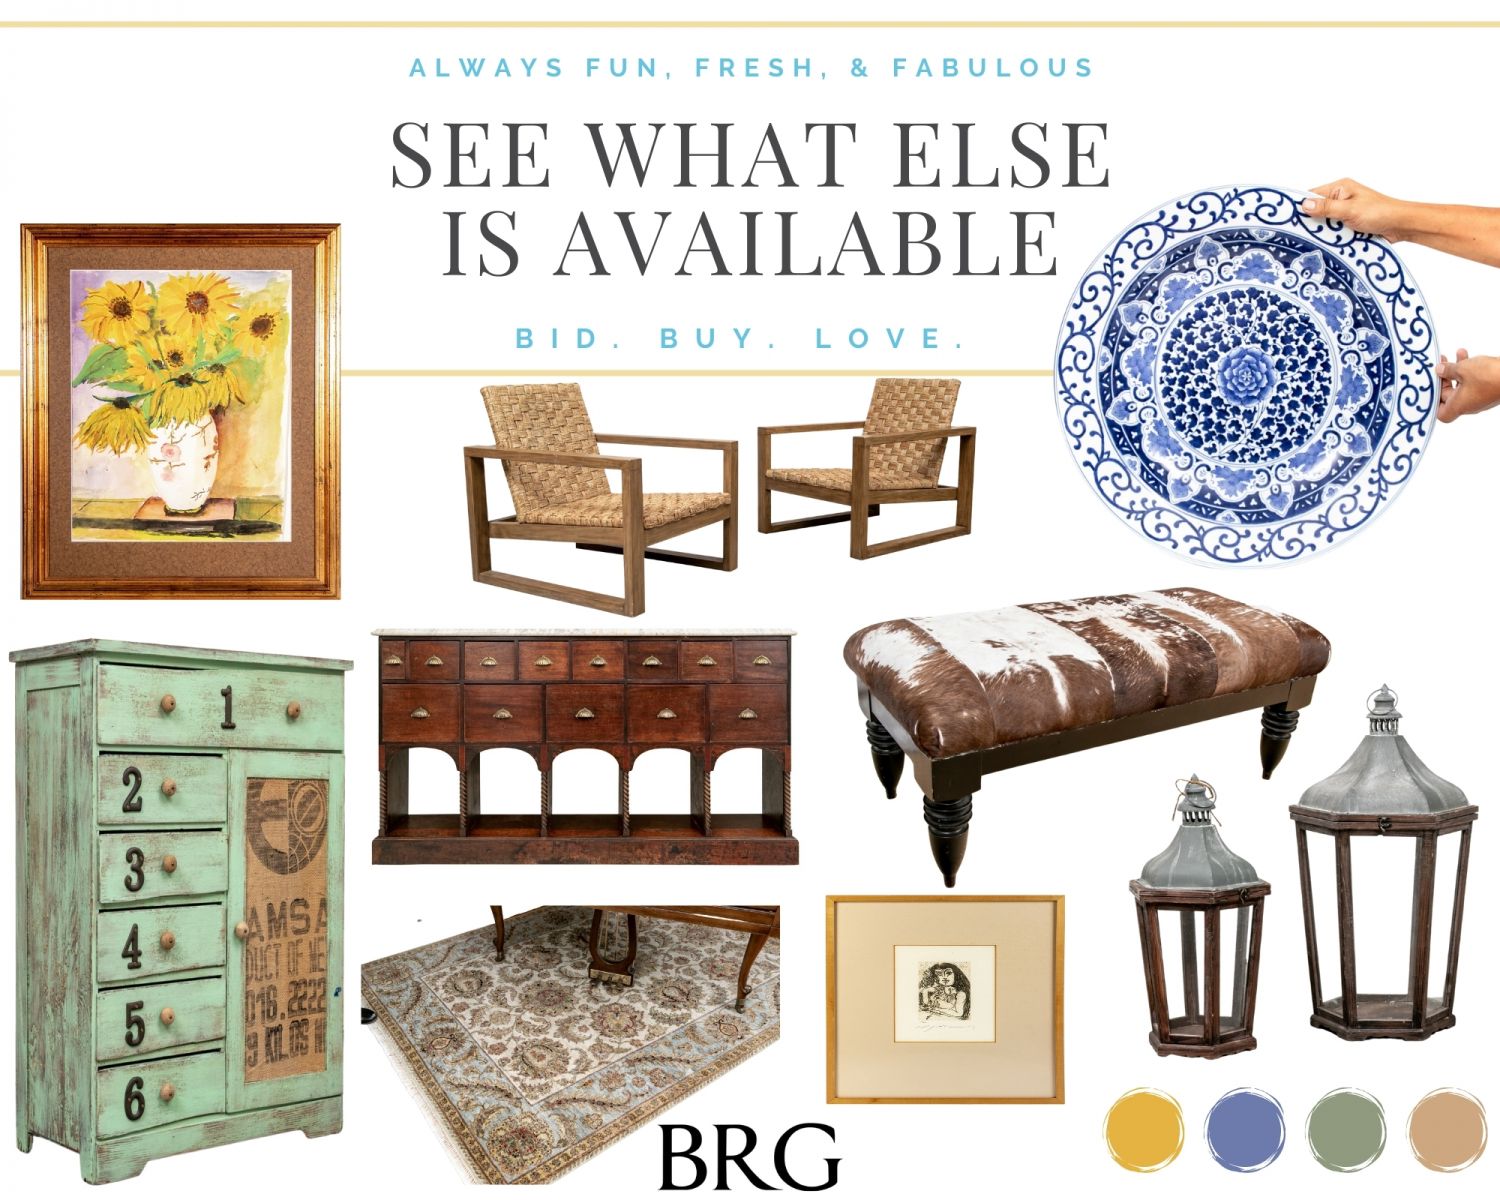 Looking for other options? Check out these fine furniture and decorative arts currently available online at BRG.